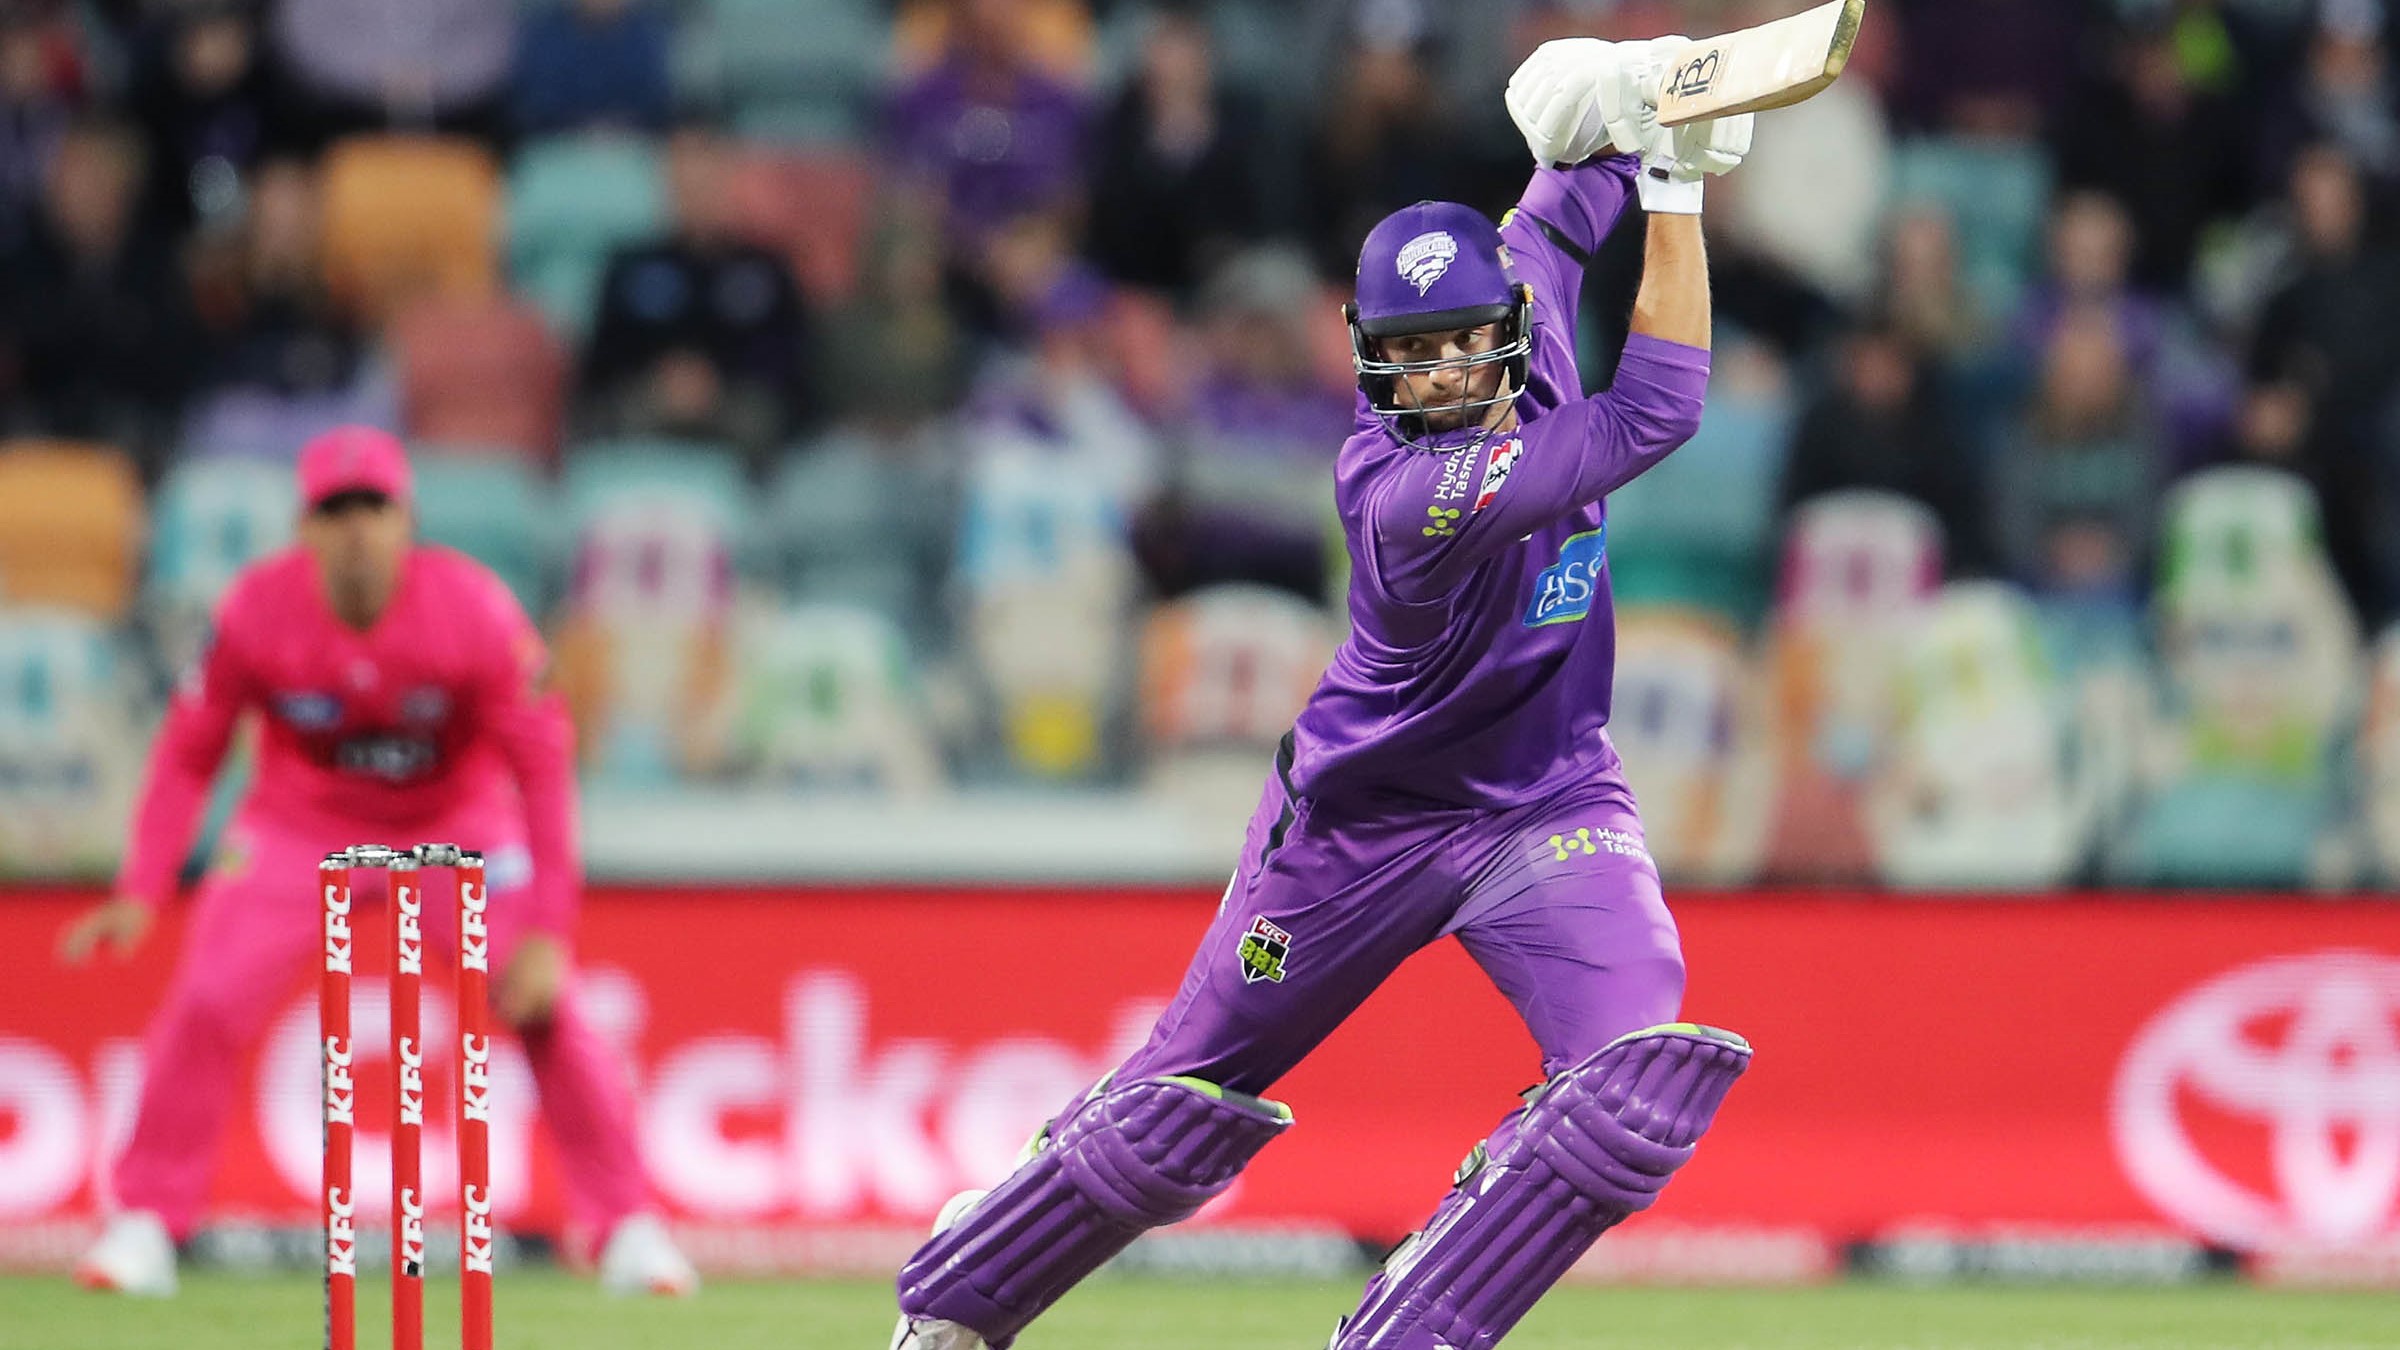 BBL | Hurricanes vs Sixers: Talking points from the game that changed between the two Power Surges